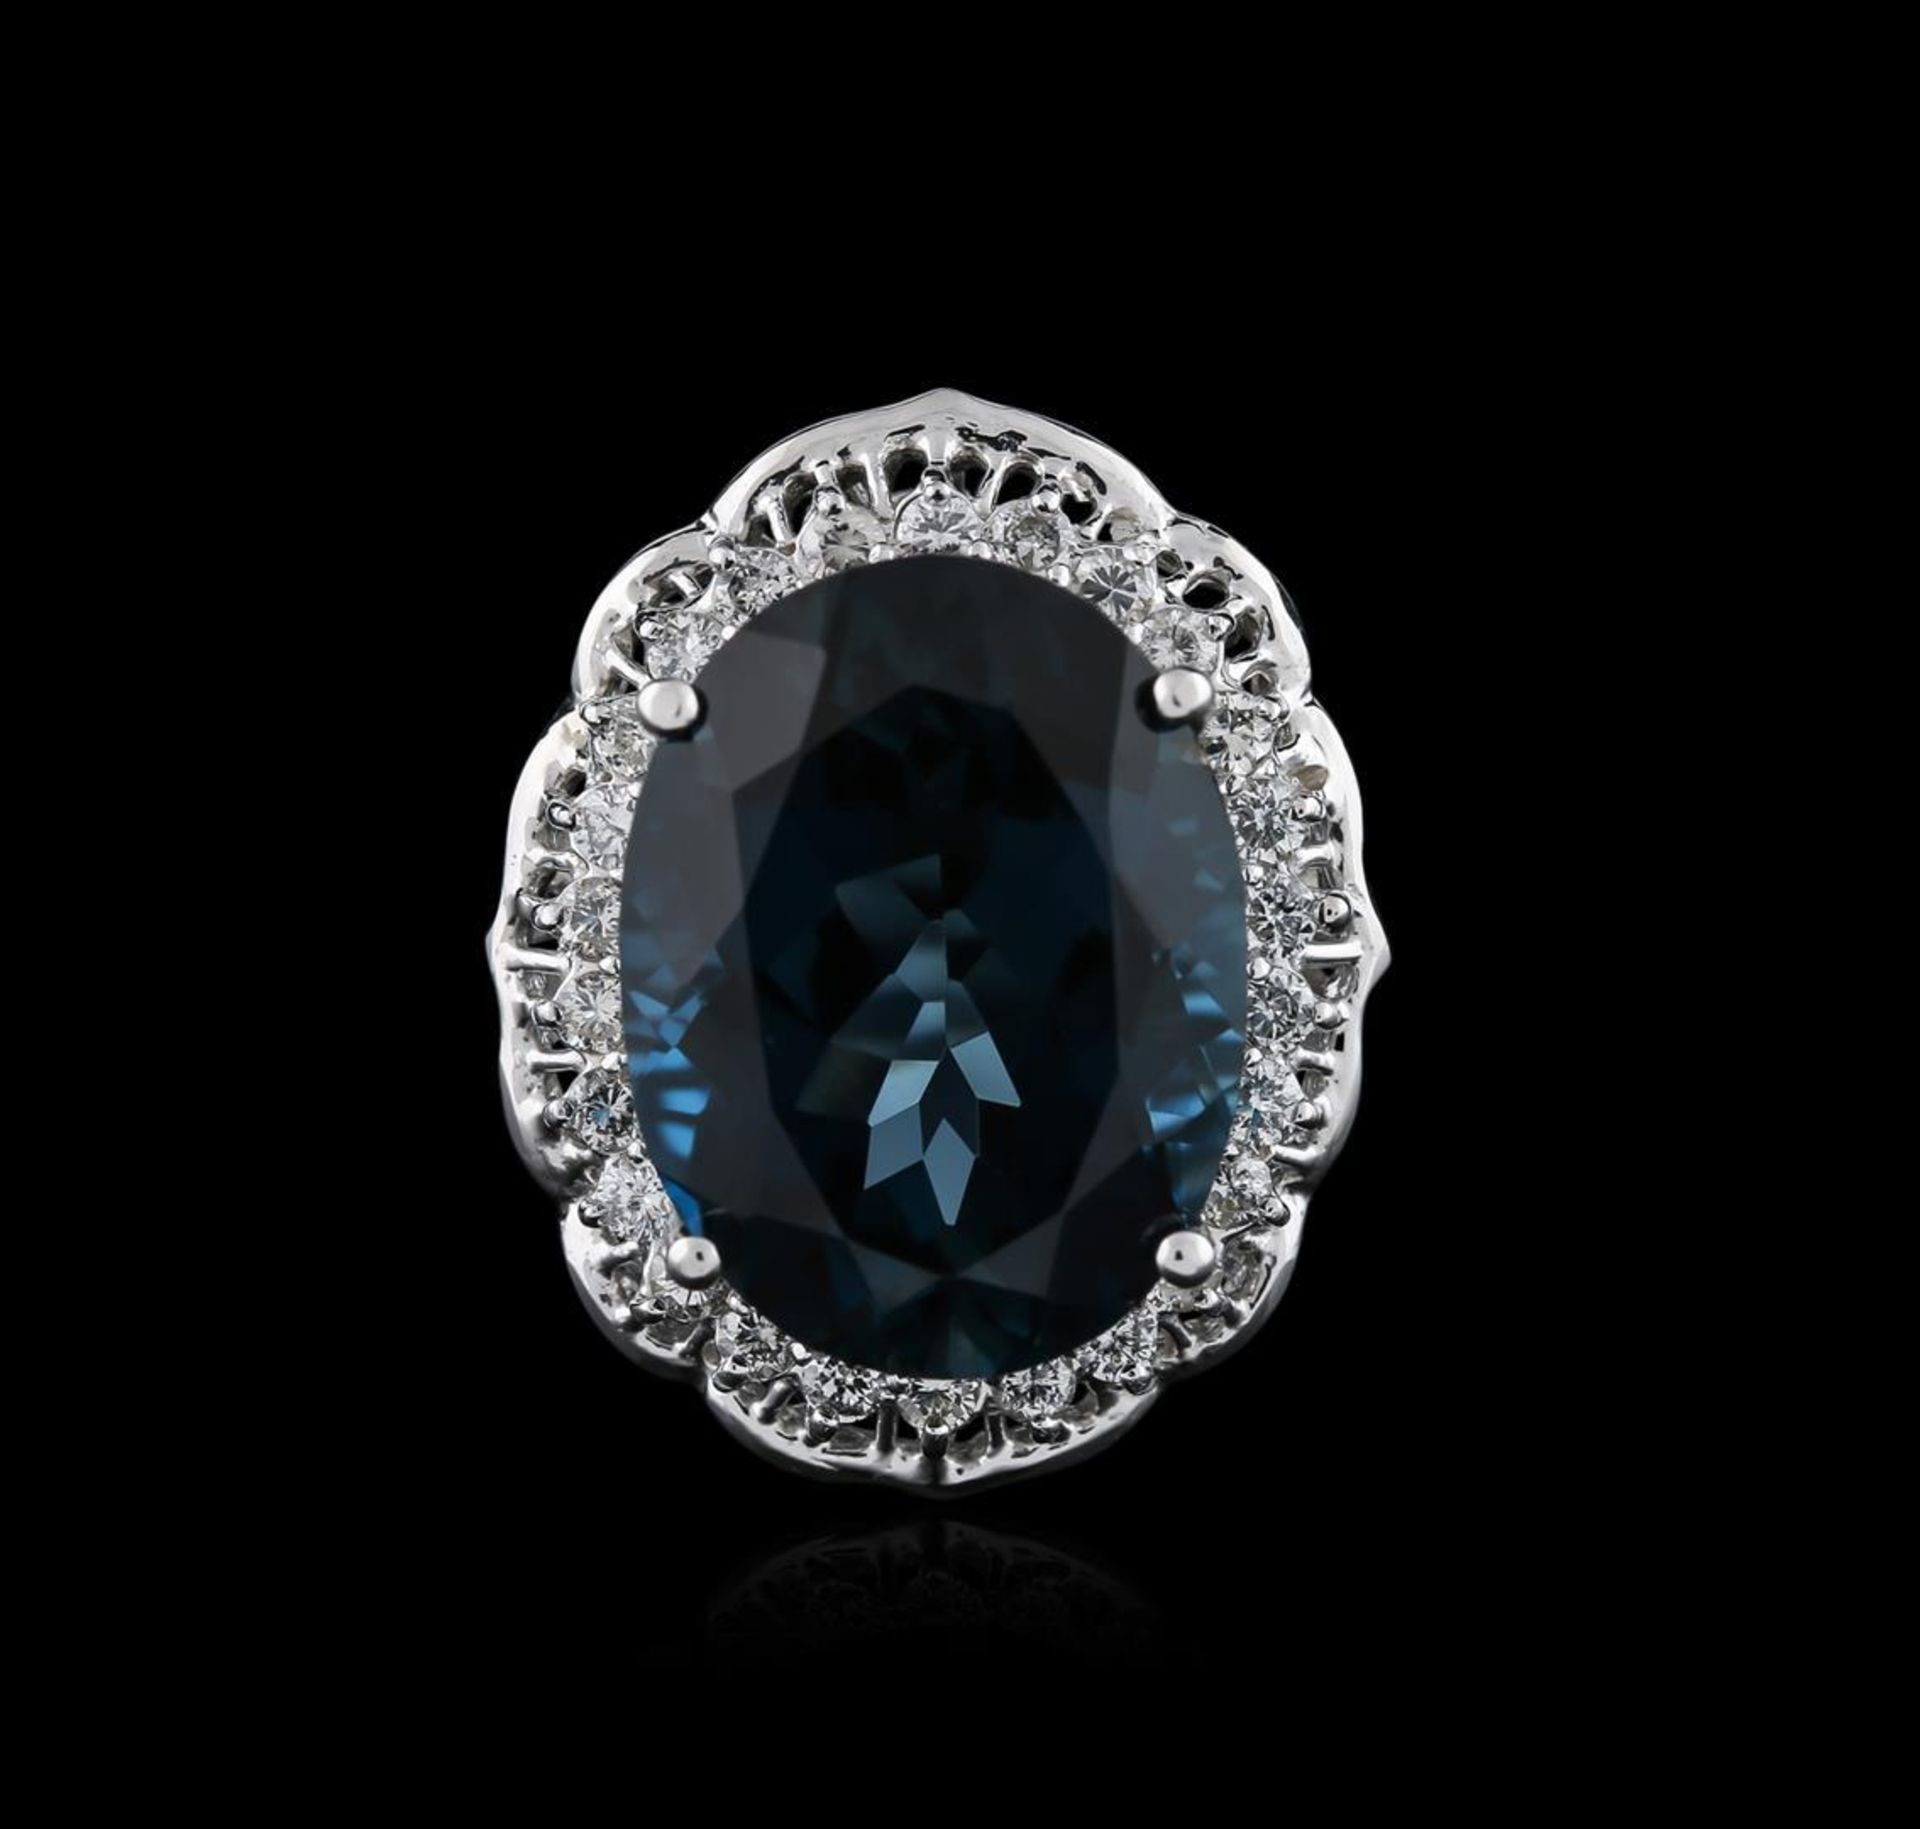 14KT White Gold 20.83 ctw Topaz and Diamond Ring - Image 2 of 3